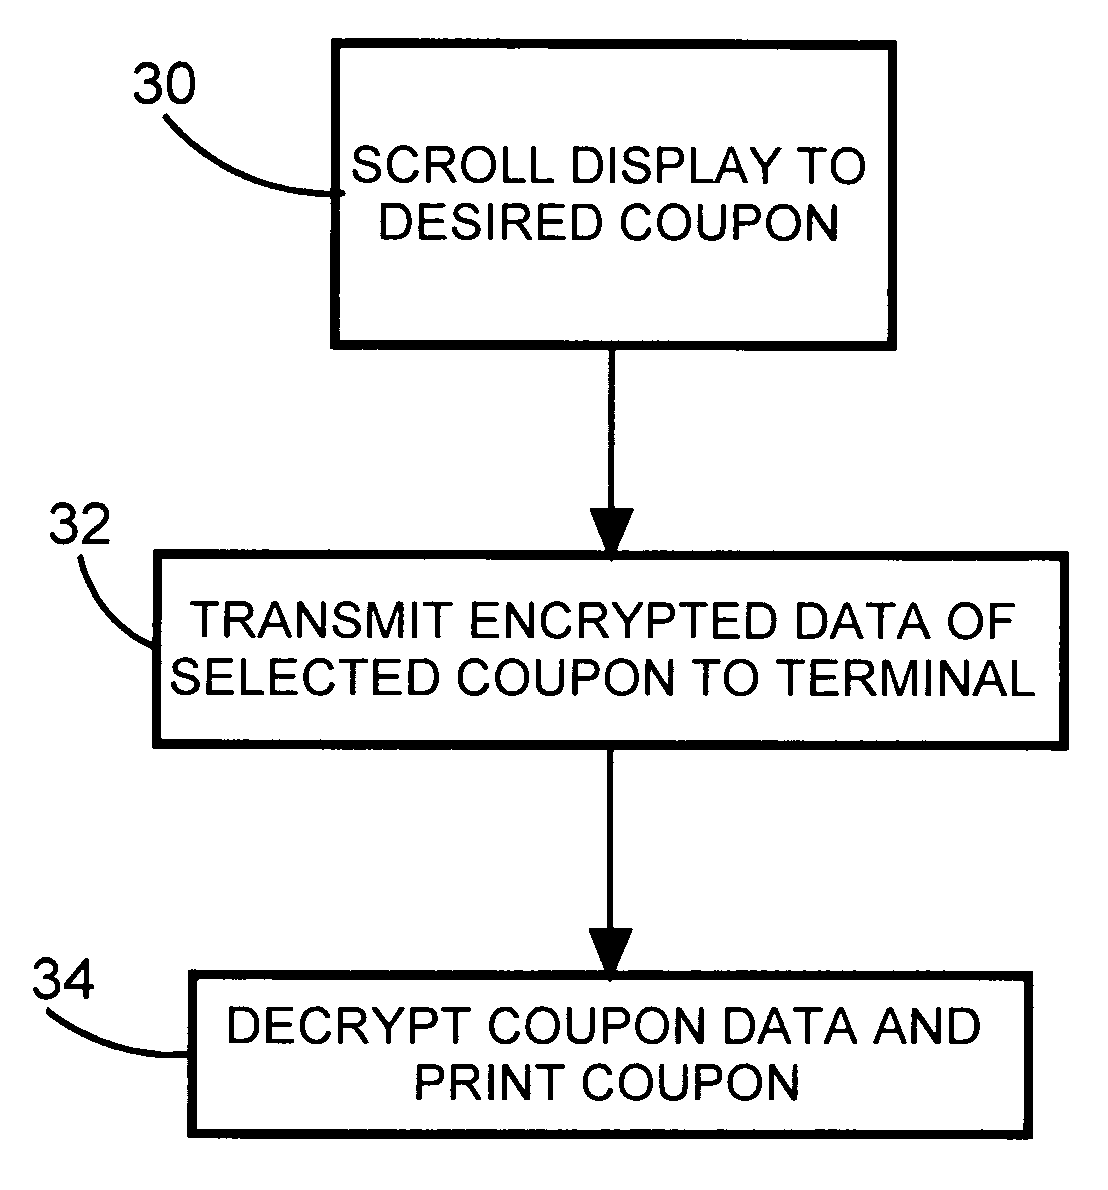 Technique for eliminating fraudulent use of printed coupons